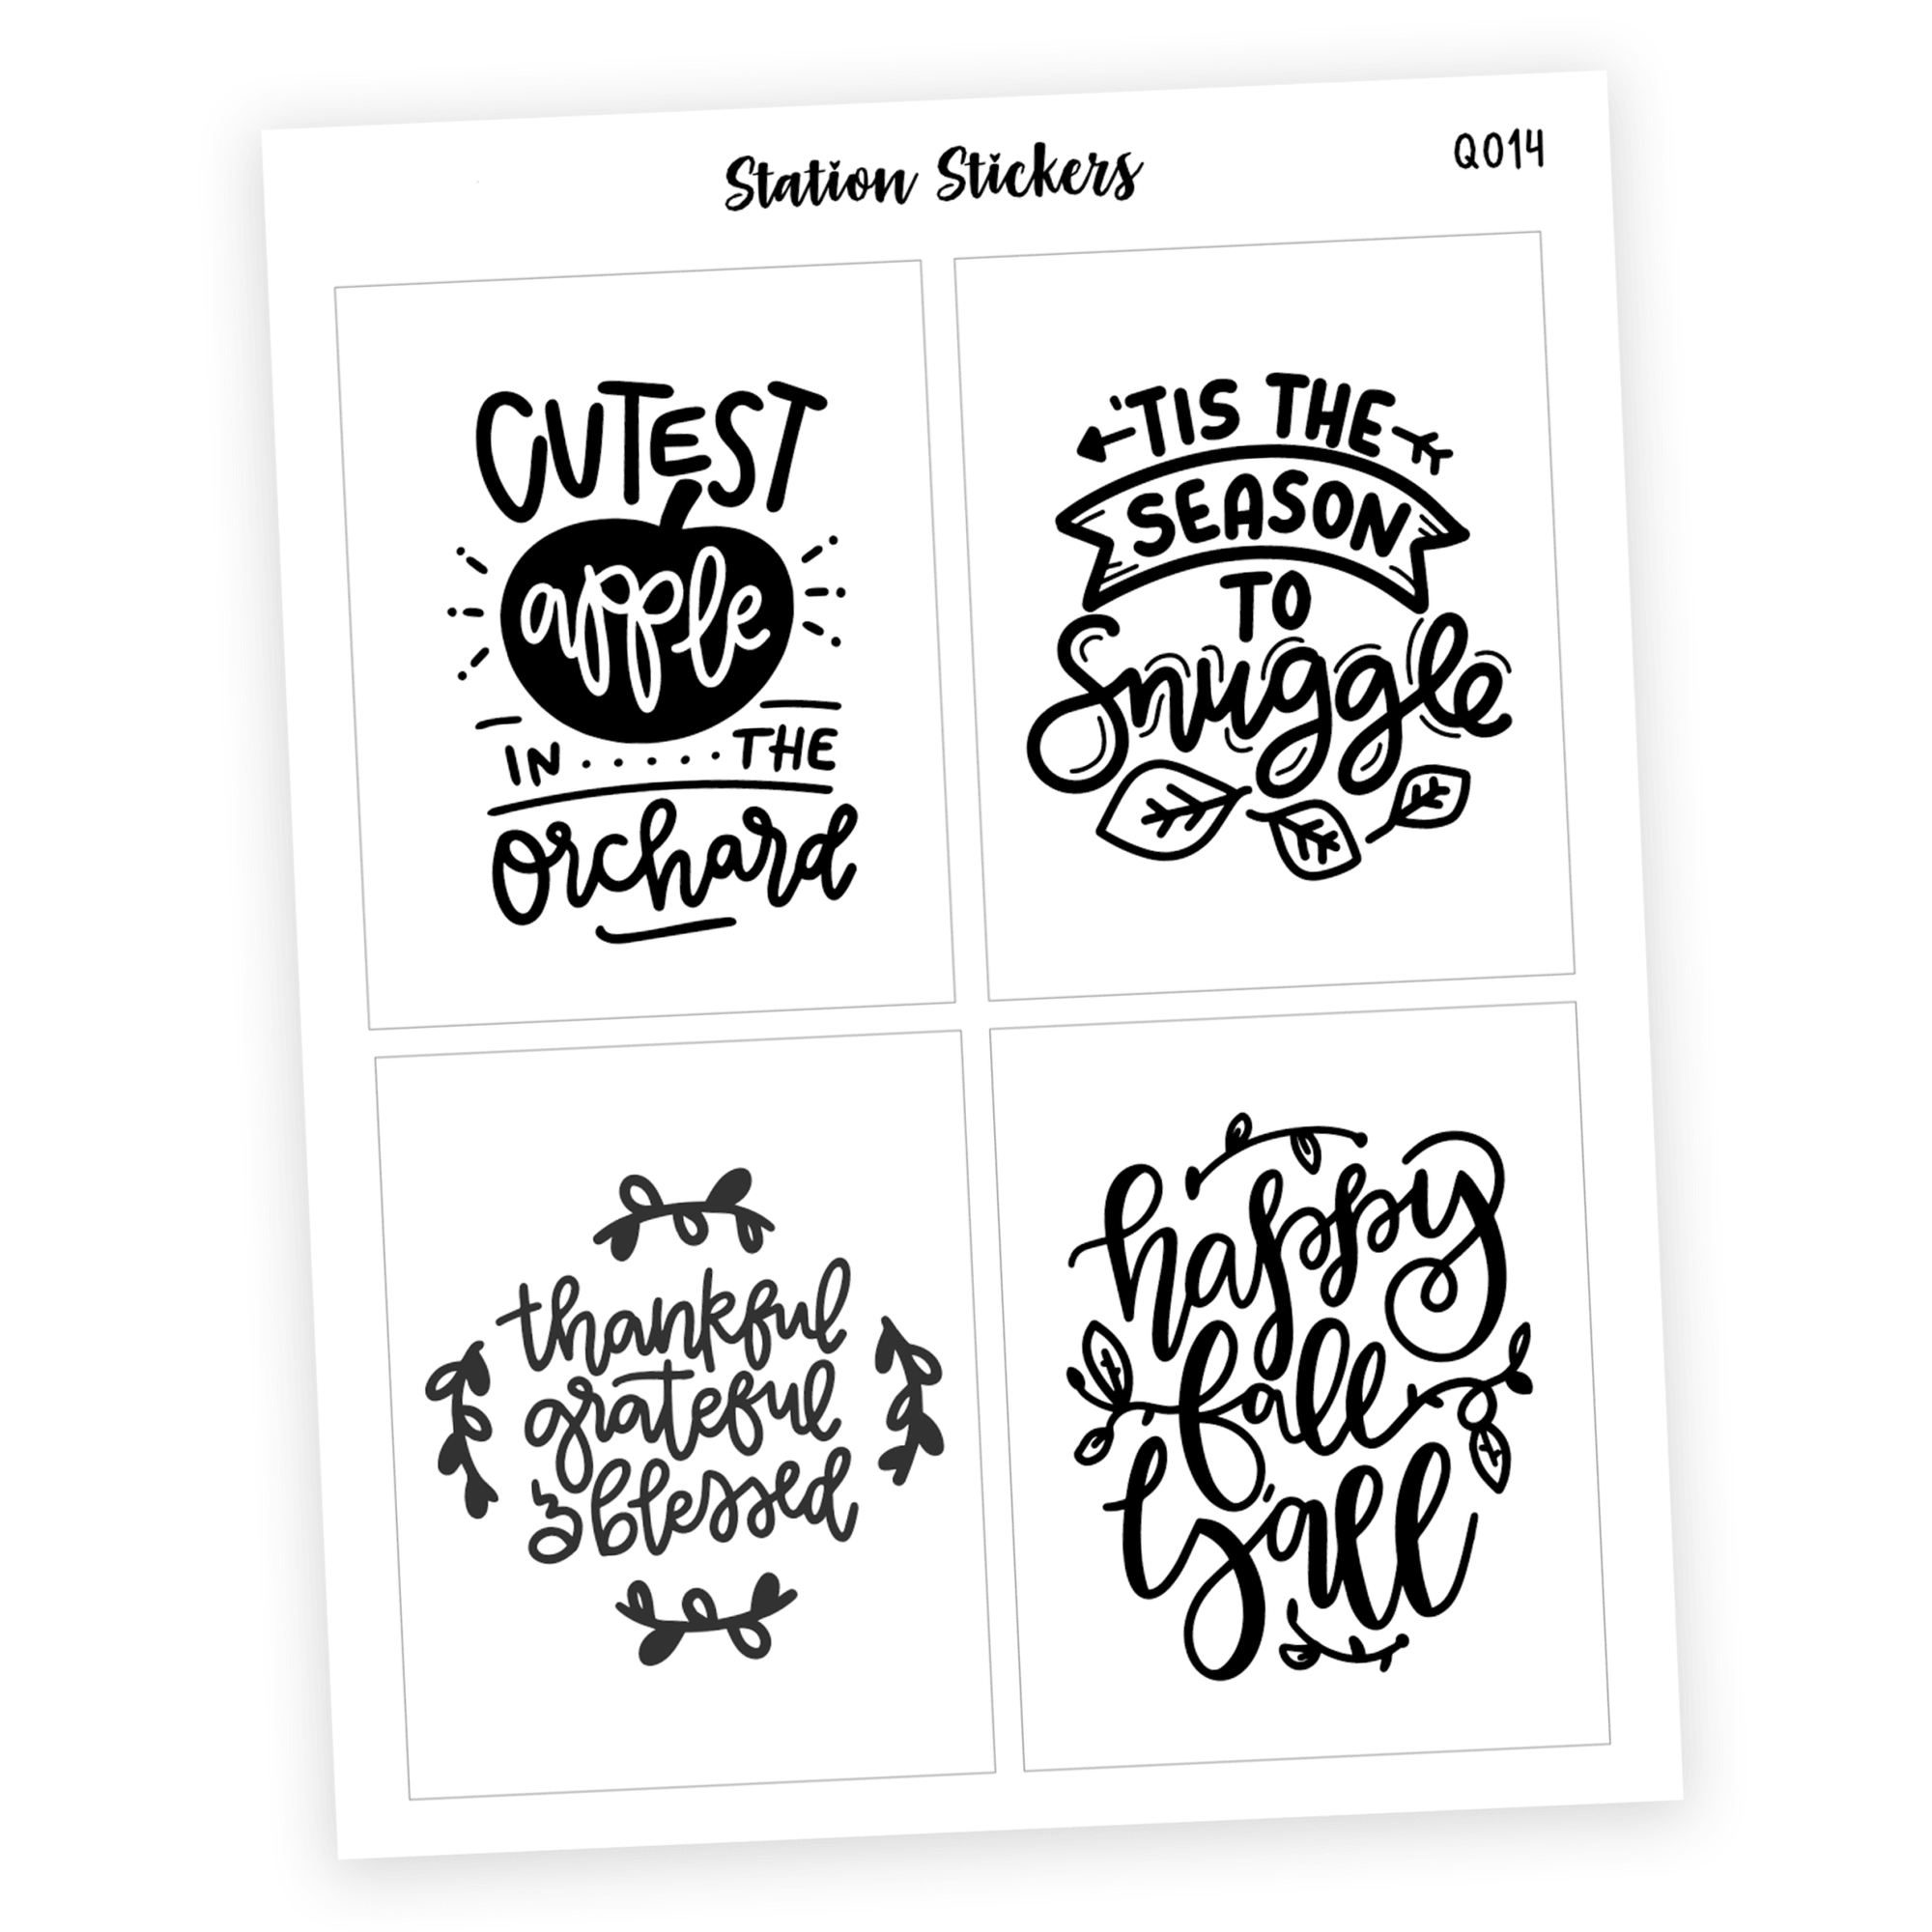 QUOTES • FALL 3 [COMING 8/7] - Station Stickers